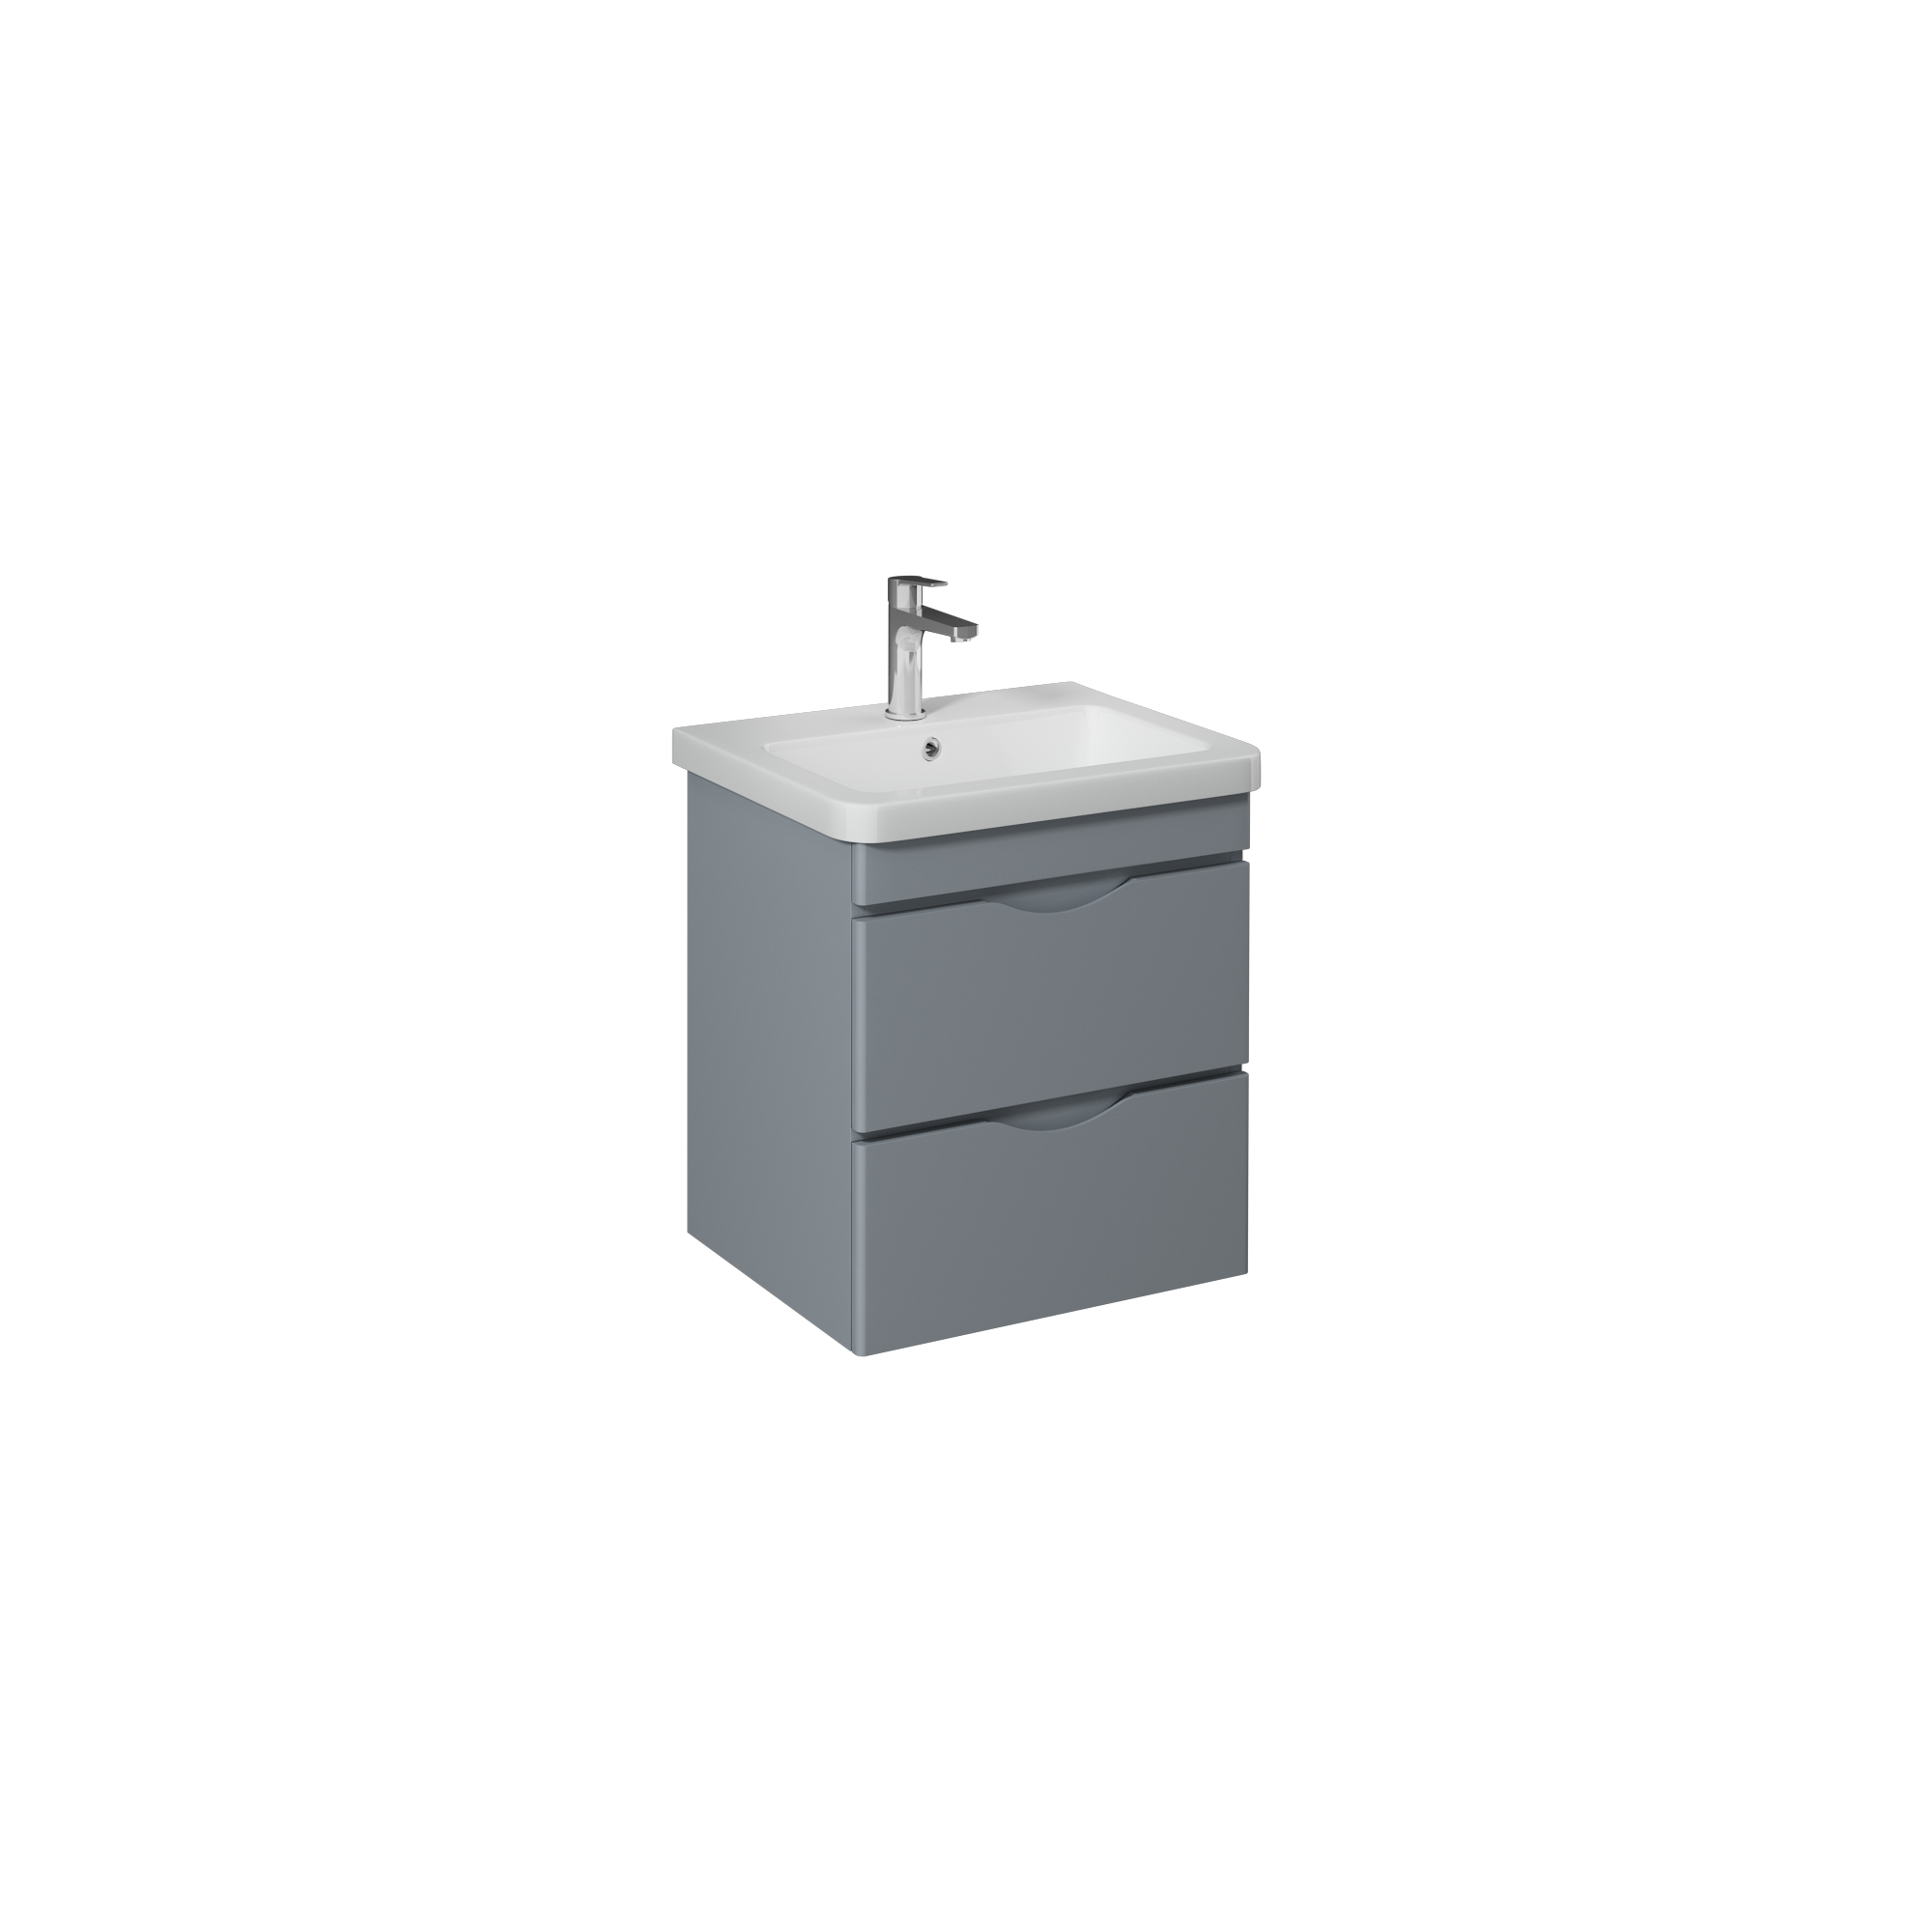 Neo 35 cm Tall Cabinet, Grey Right